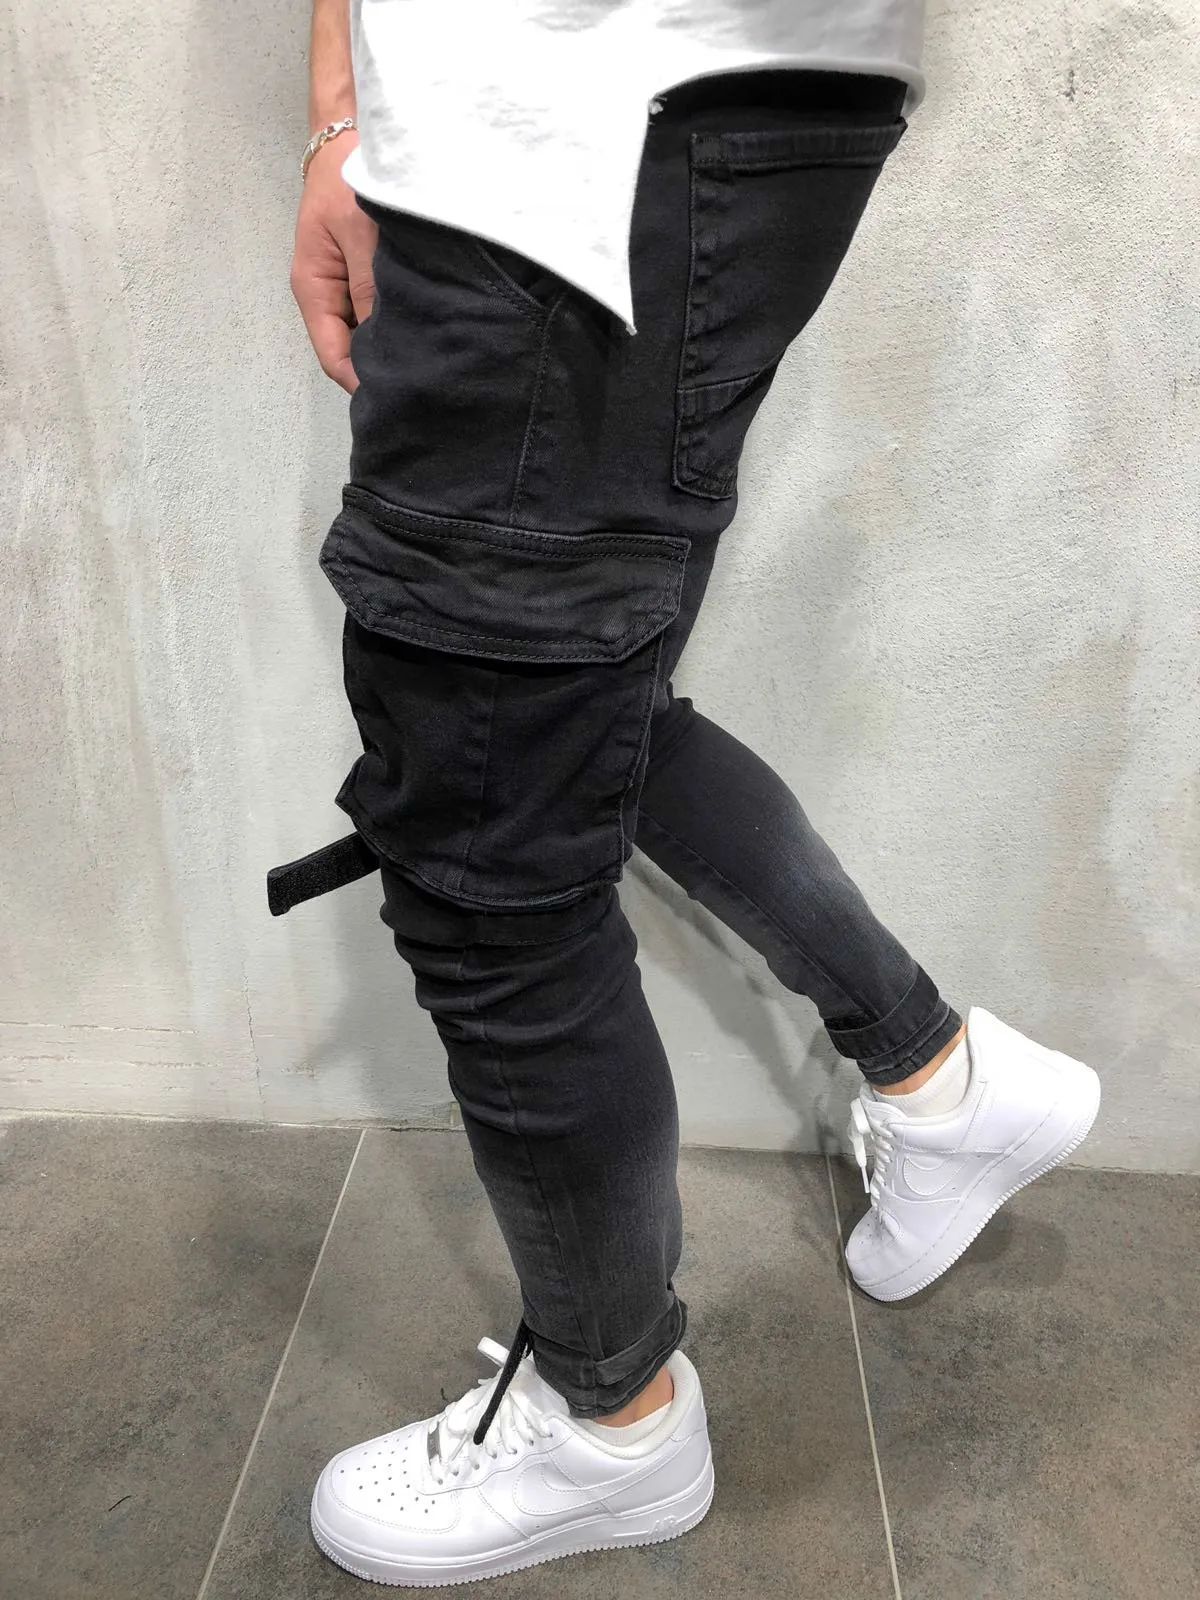 Black Denim Slim Fit Cargo Jeans For Men With Pockets And Straps For Men  Skinny Pencil Pants For Casual Cargo Wear 255C From Lqbyc, $35.01